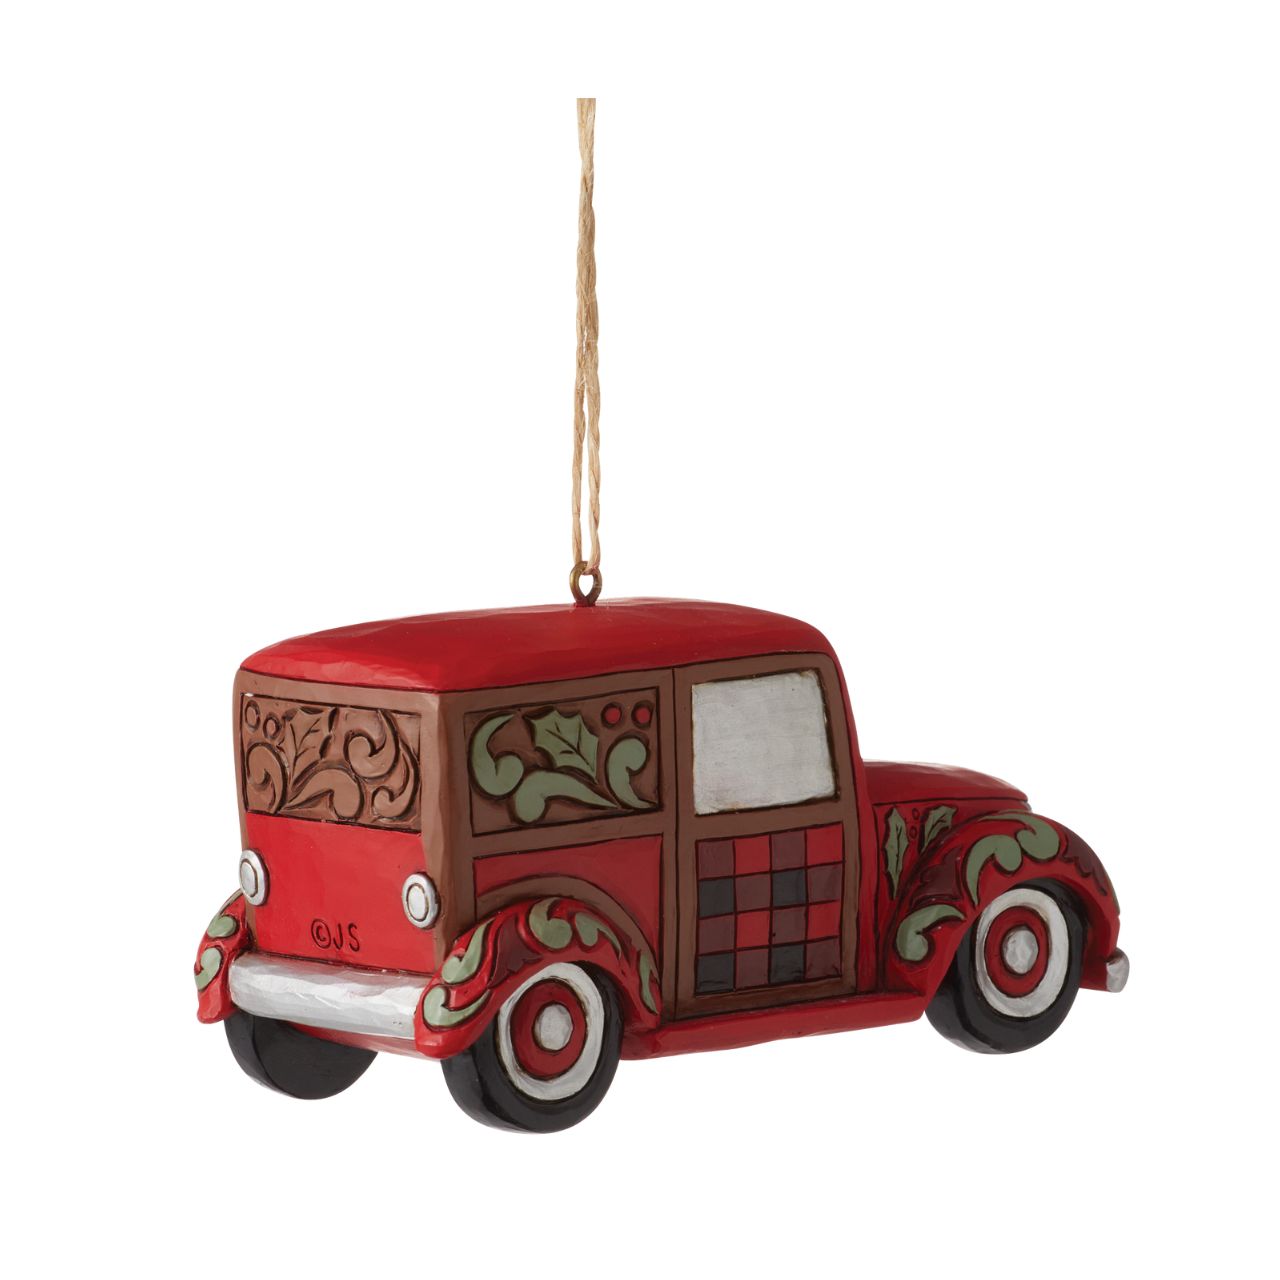 Heartwood Creek Highland Glen Santa with Wagon Hanging Ornament  Designed by award winning artist Jim Shore as part of the Heartwood Creek Highland Glen Collection, hand crafted using high quality cast stone and hand painted, this festive wagoneer hanging ornament is perfect for the Christmas season.